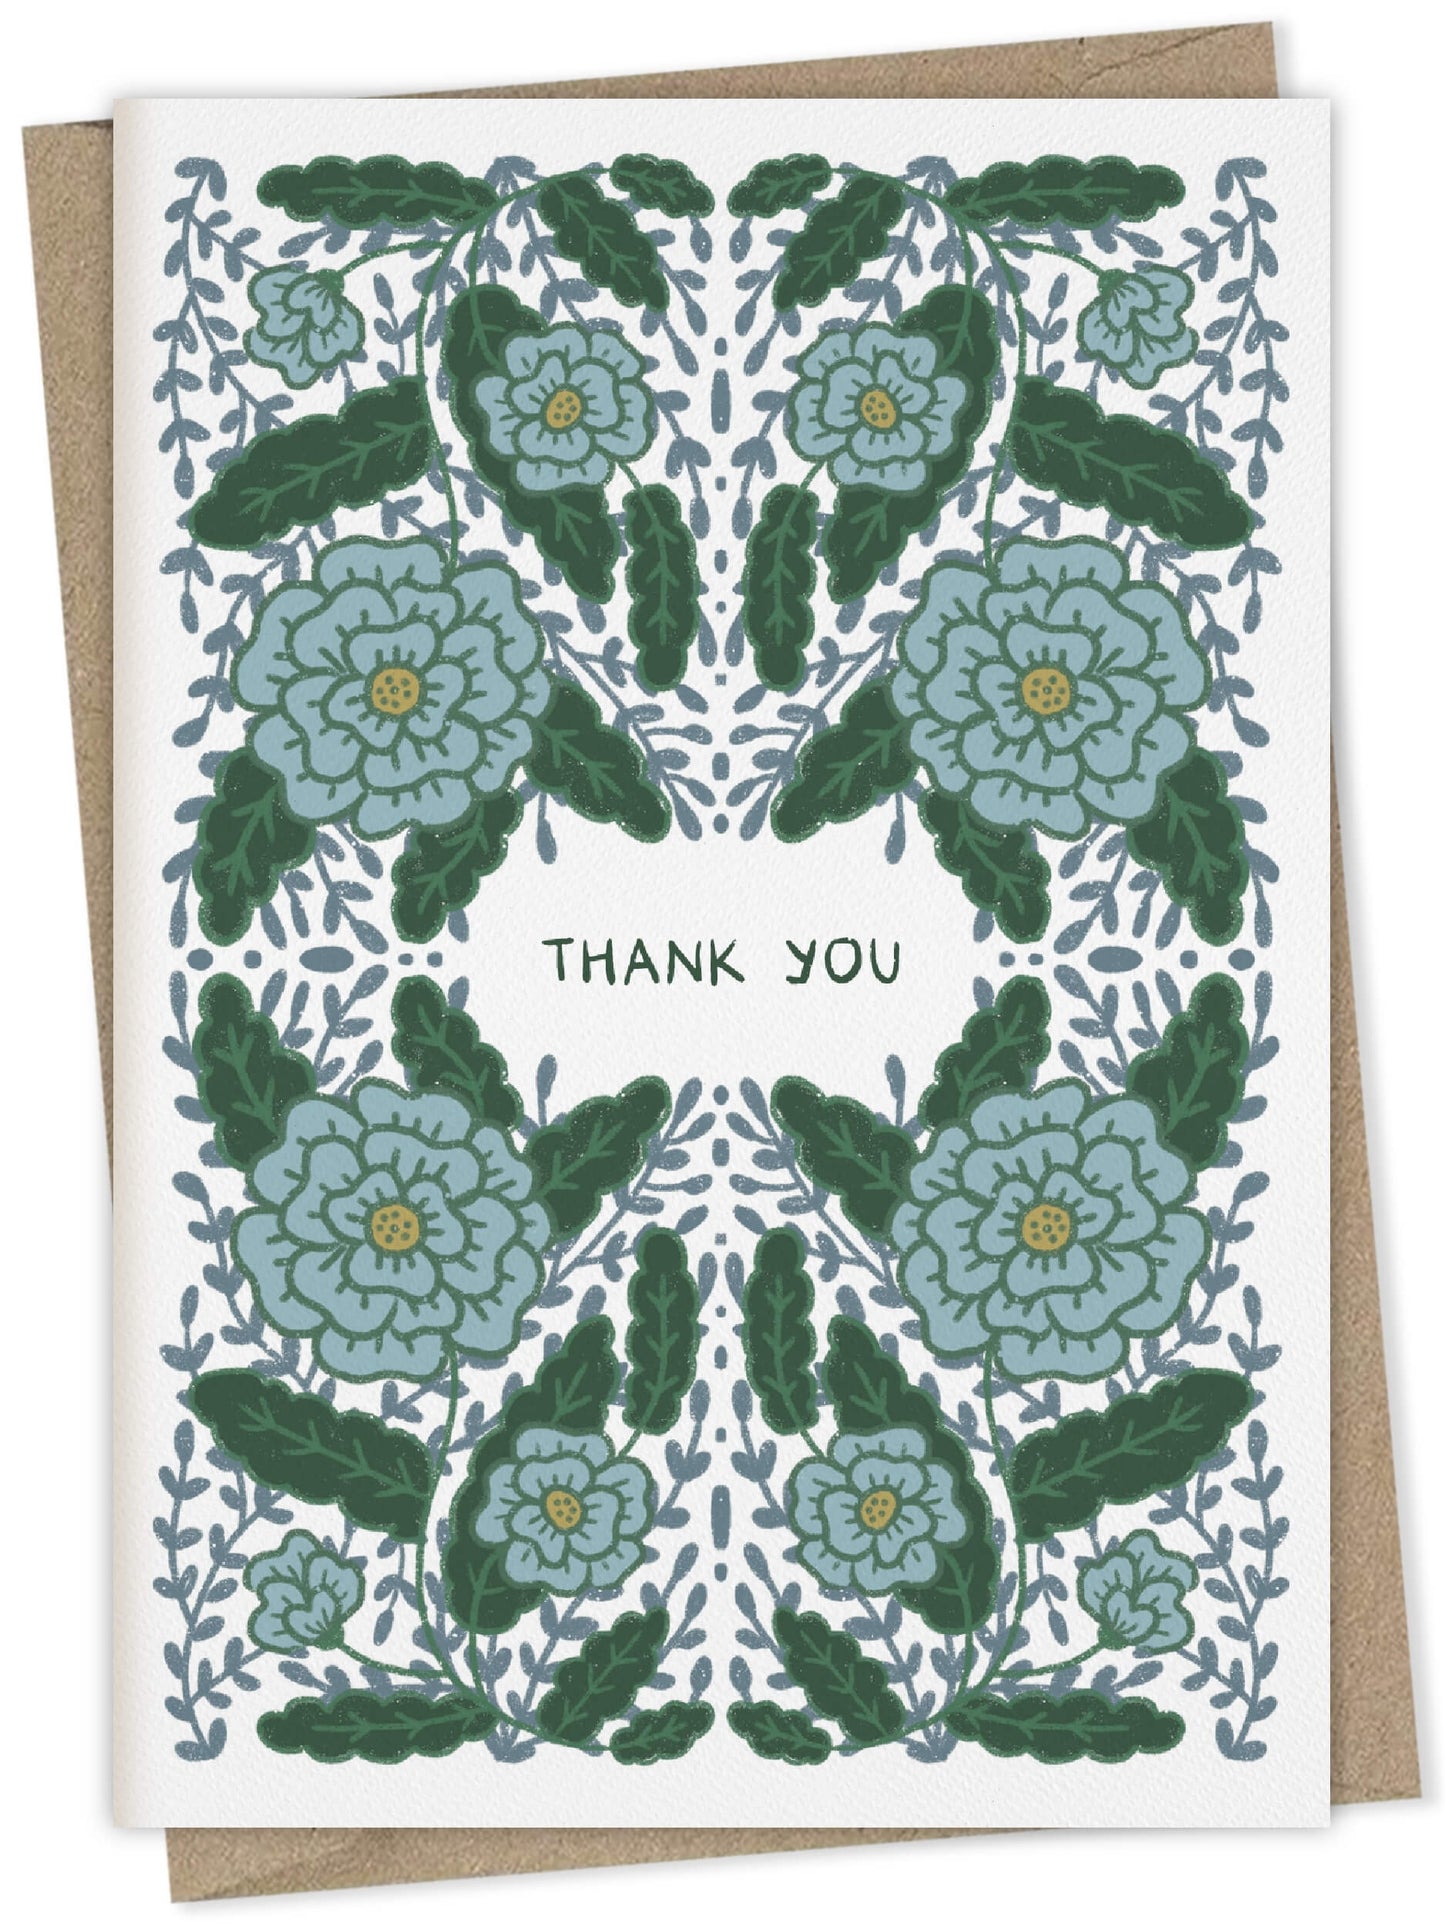 Thank you with blue flowers – floral greeting card